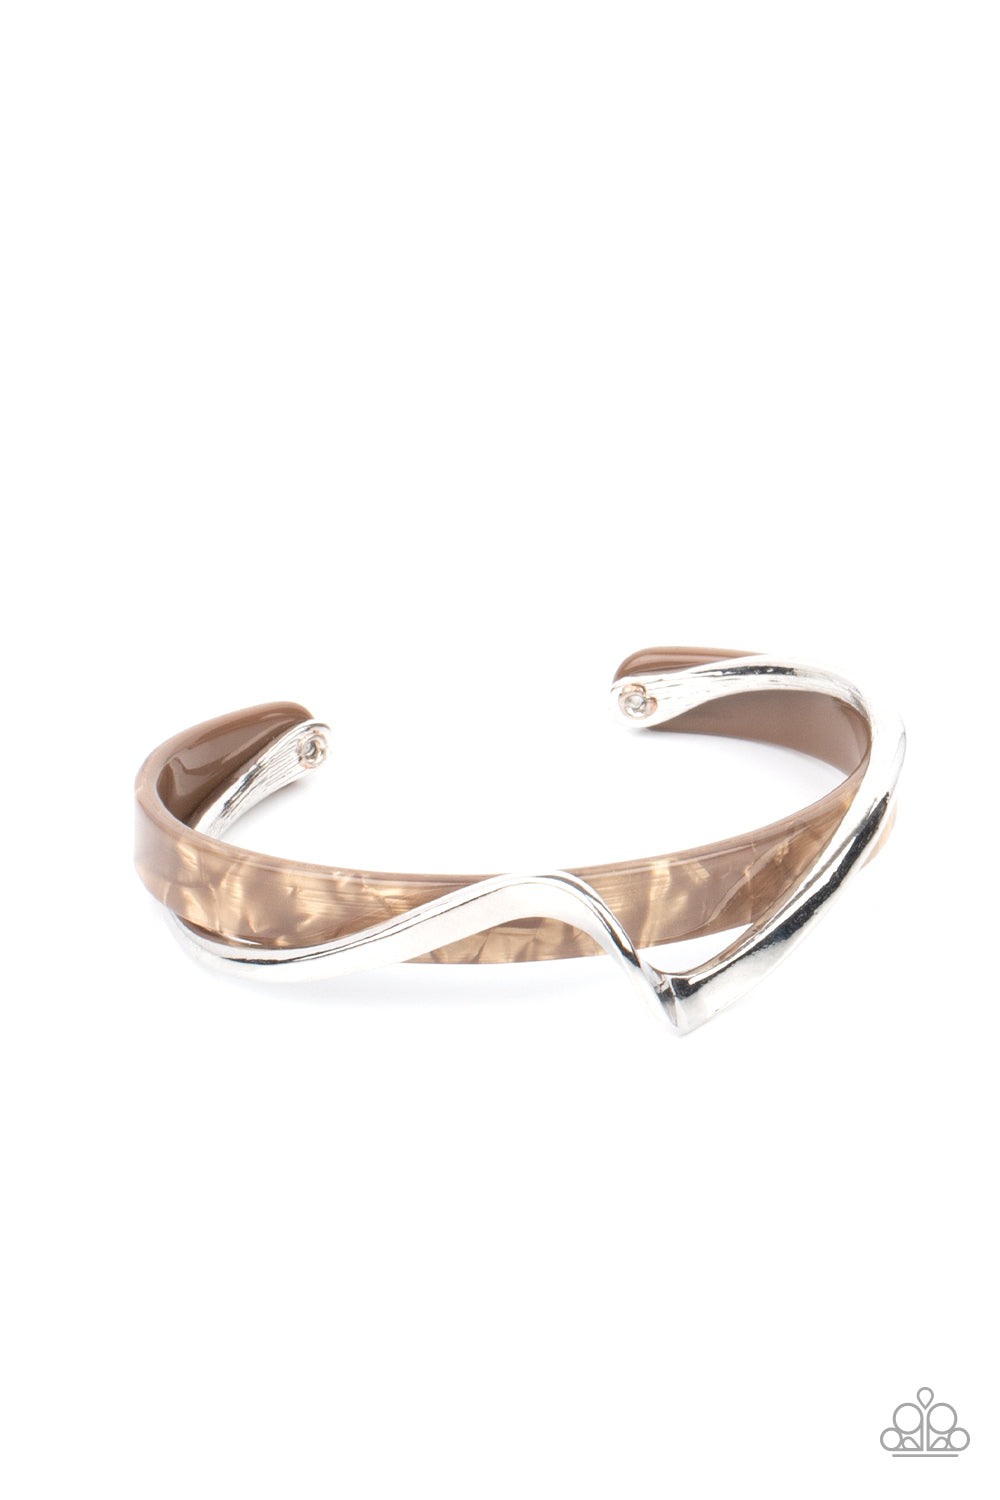 Paparazzi Craveable Curves - Brown Bracelet - A Finishing Touch Jewelry